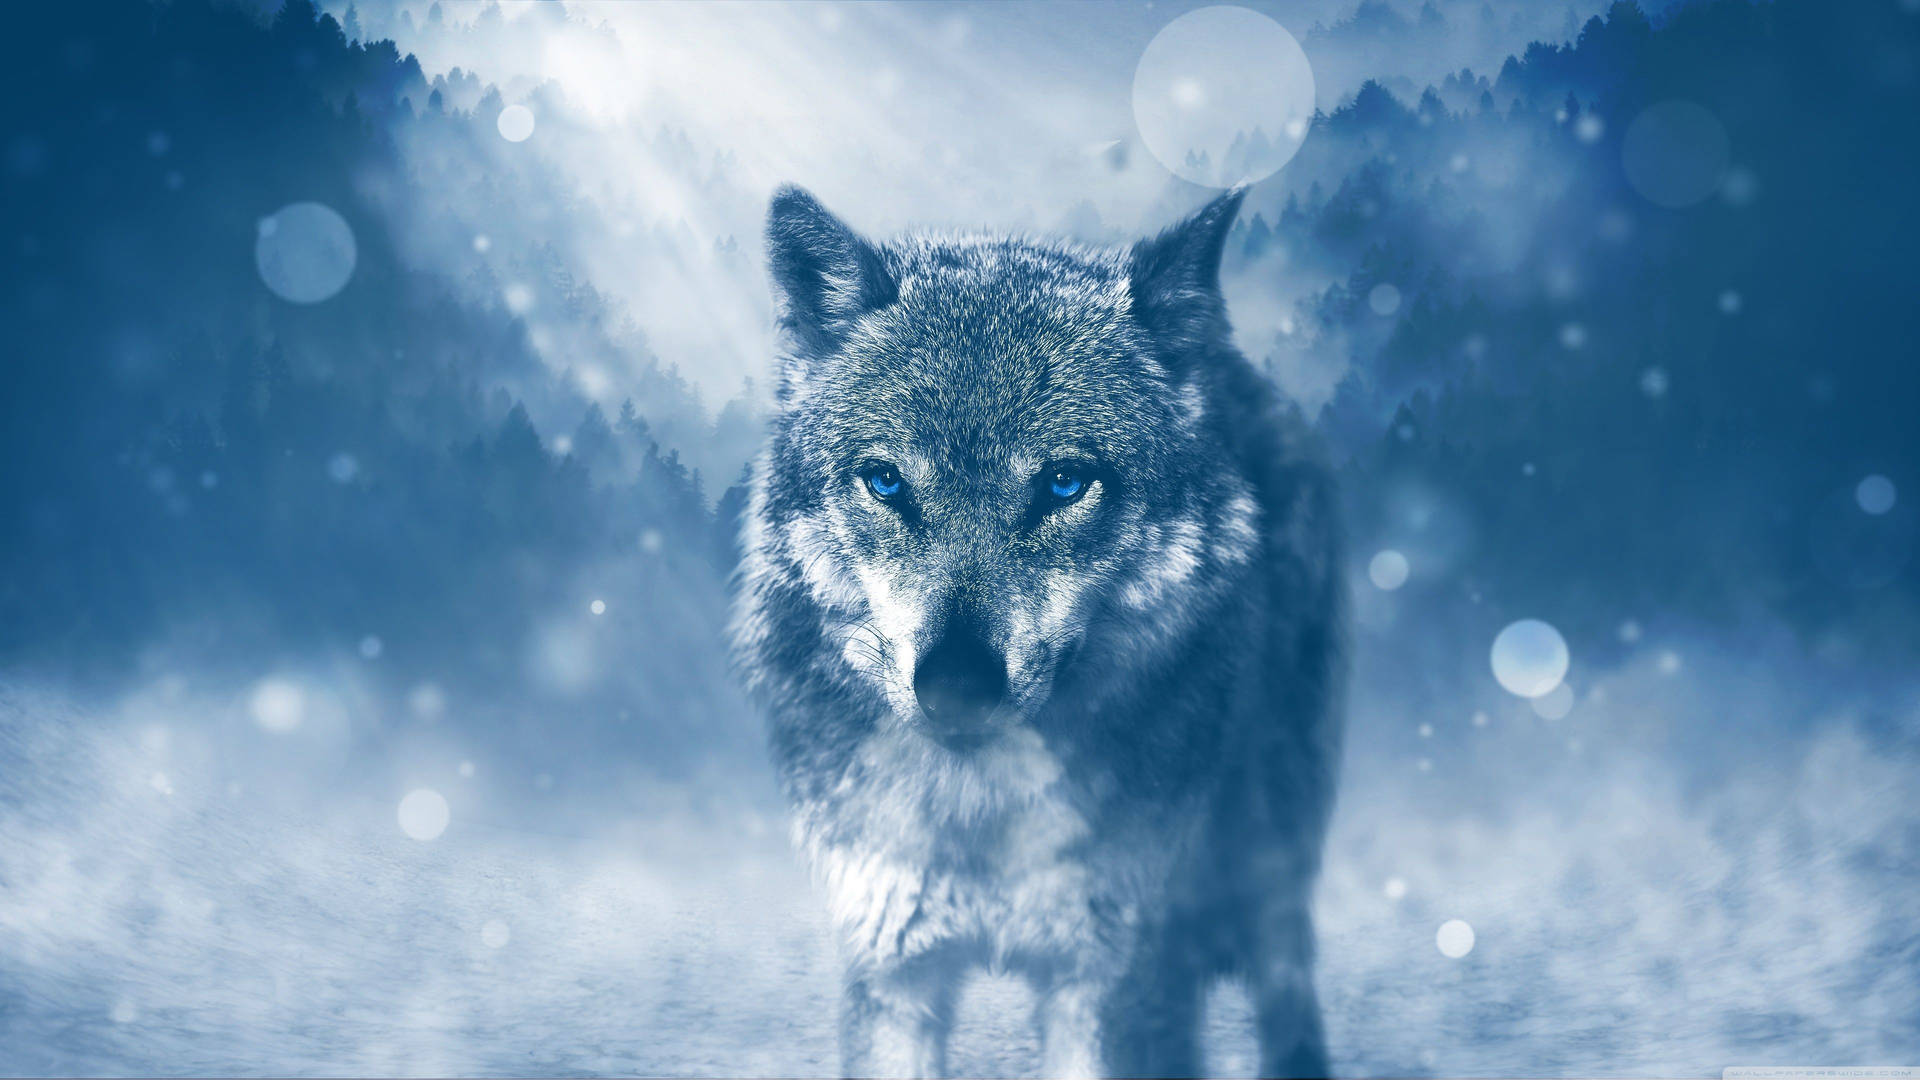 A Wolf Prowling the Cold Winter Night Wallpaper